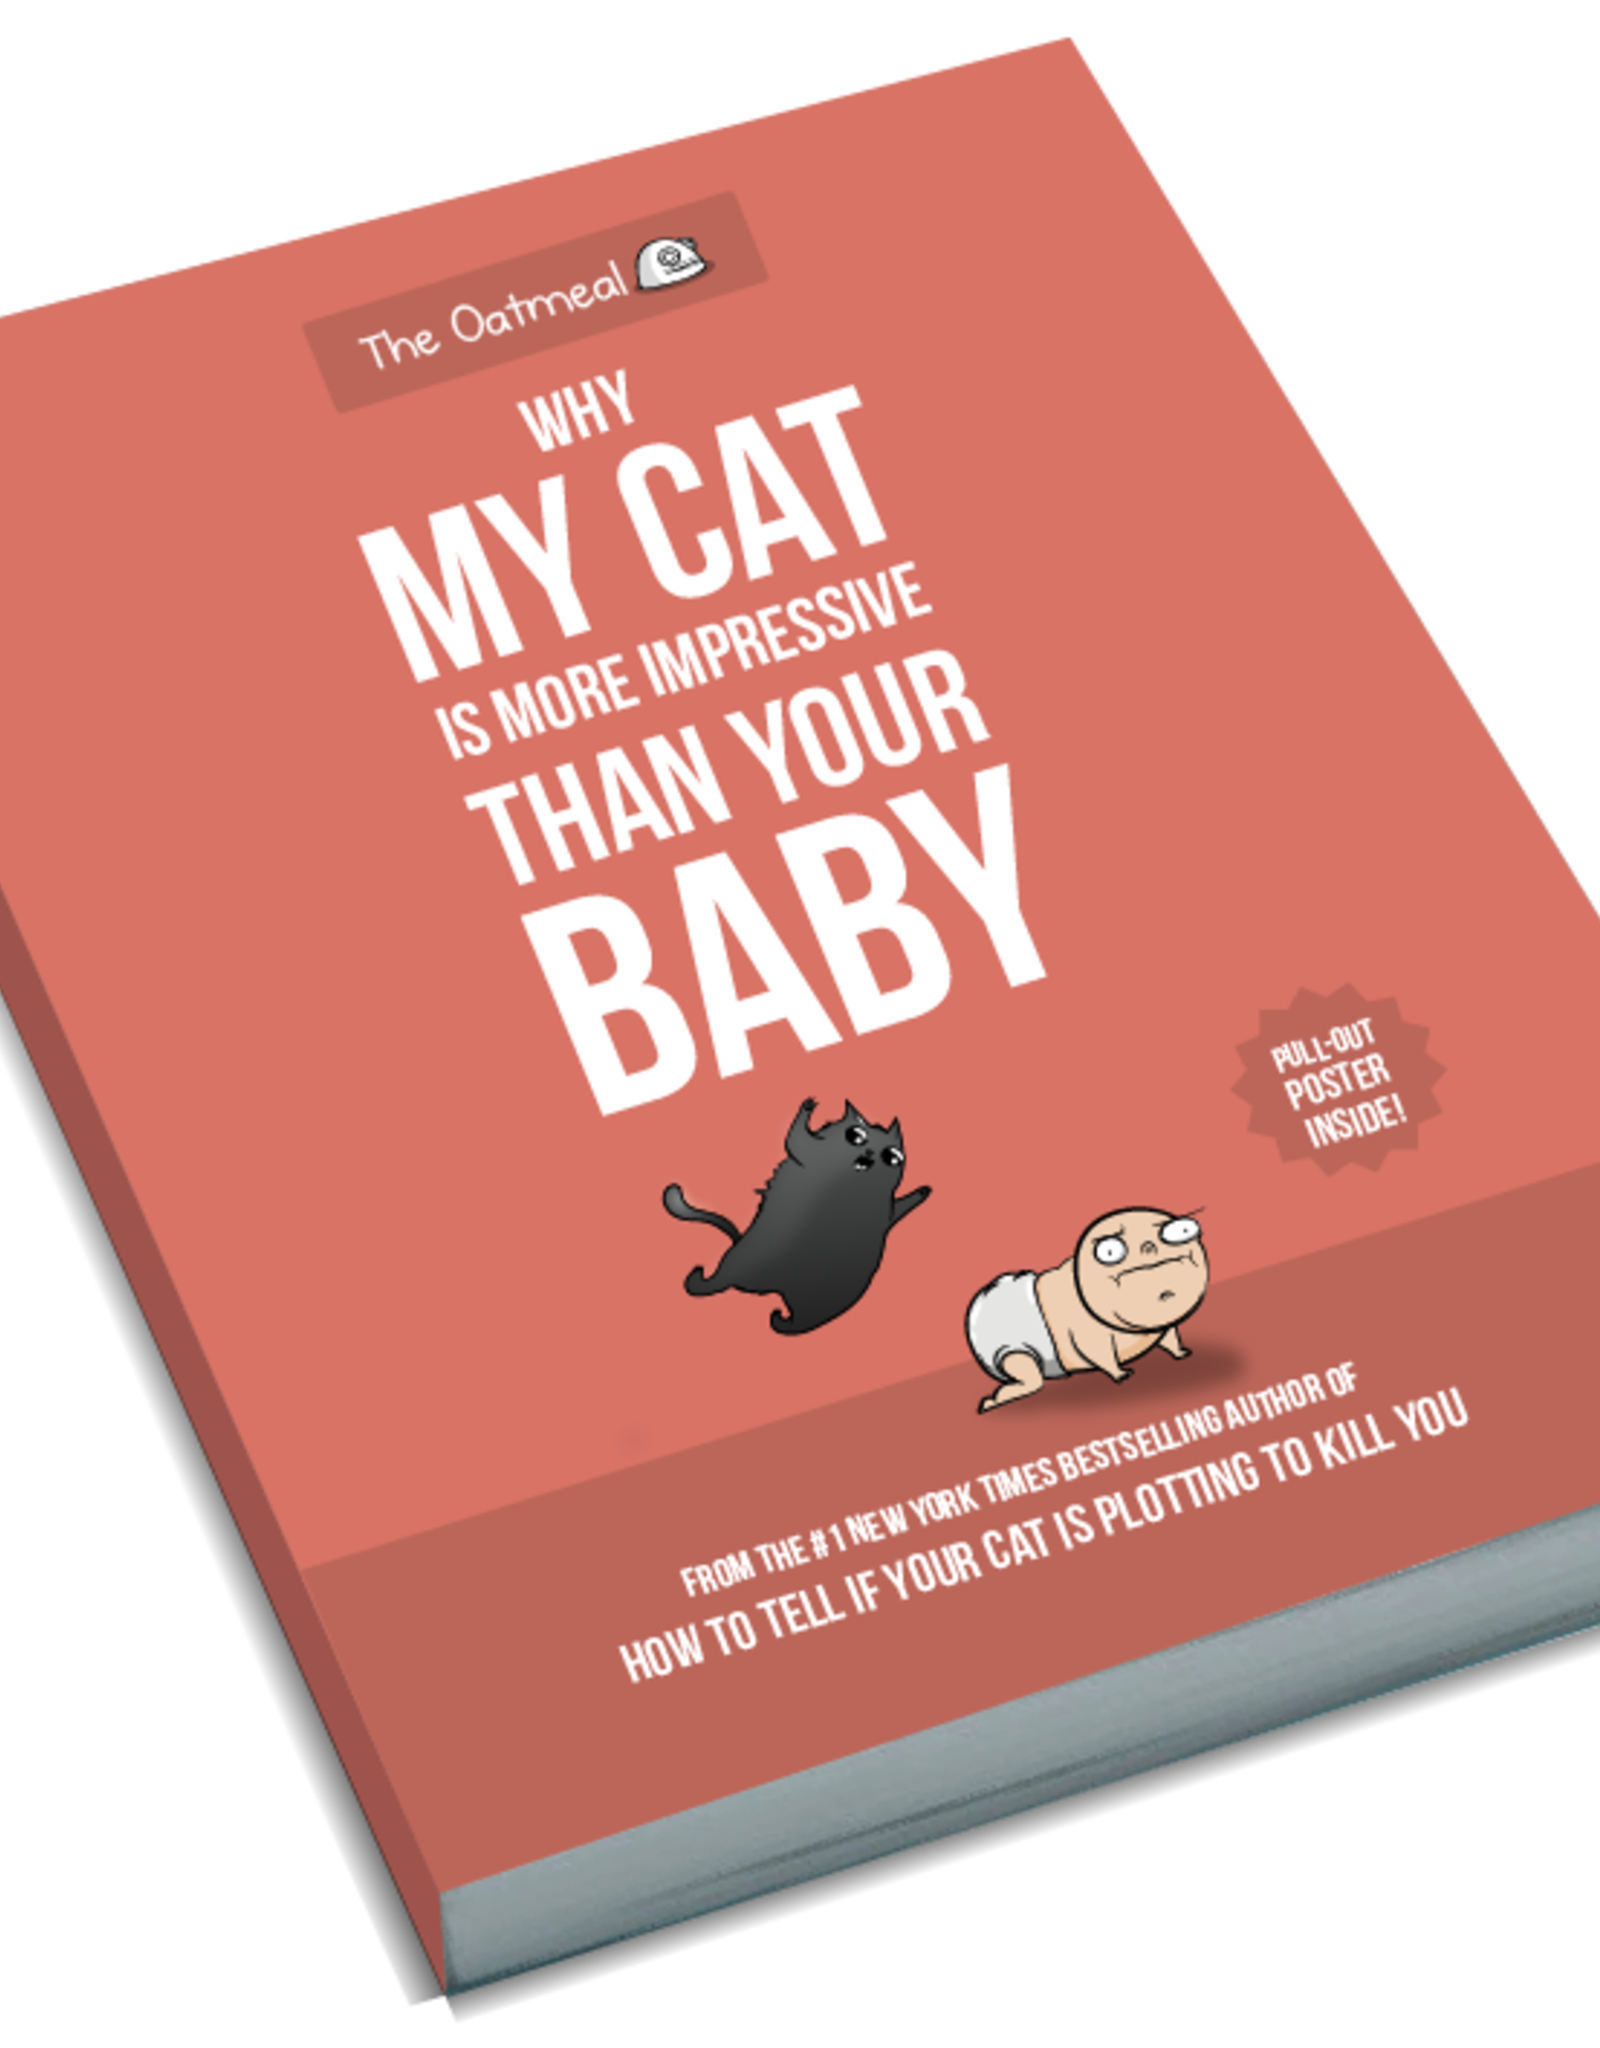 The oatmeal Why my cat is more impressive than your baby - The Oatmeal